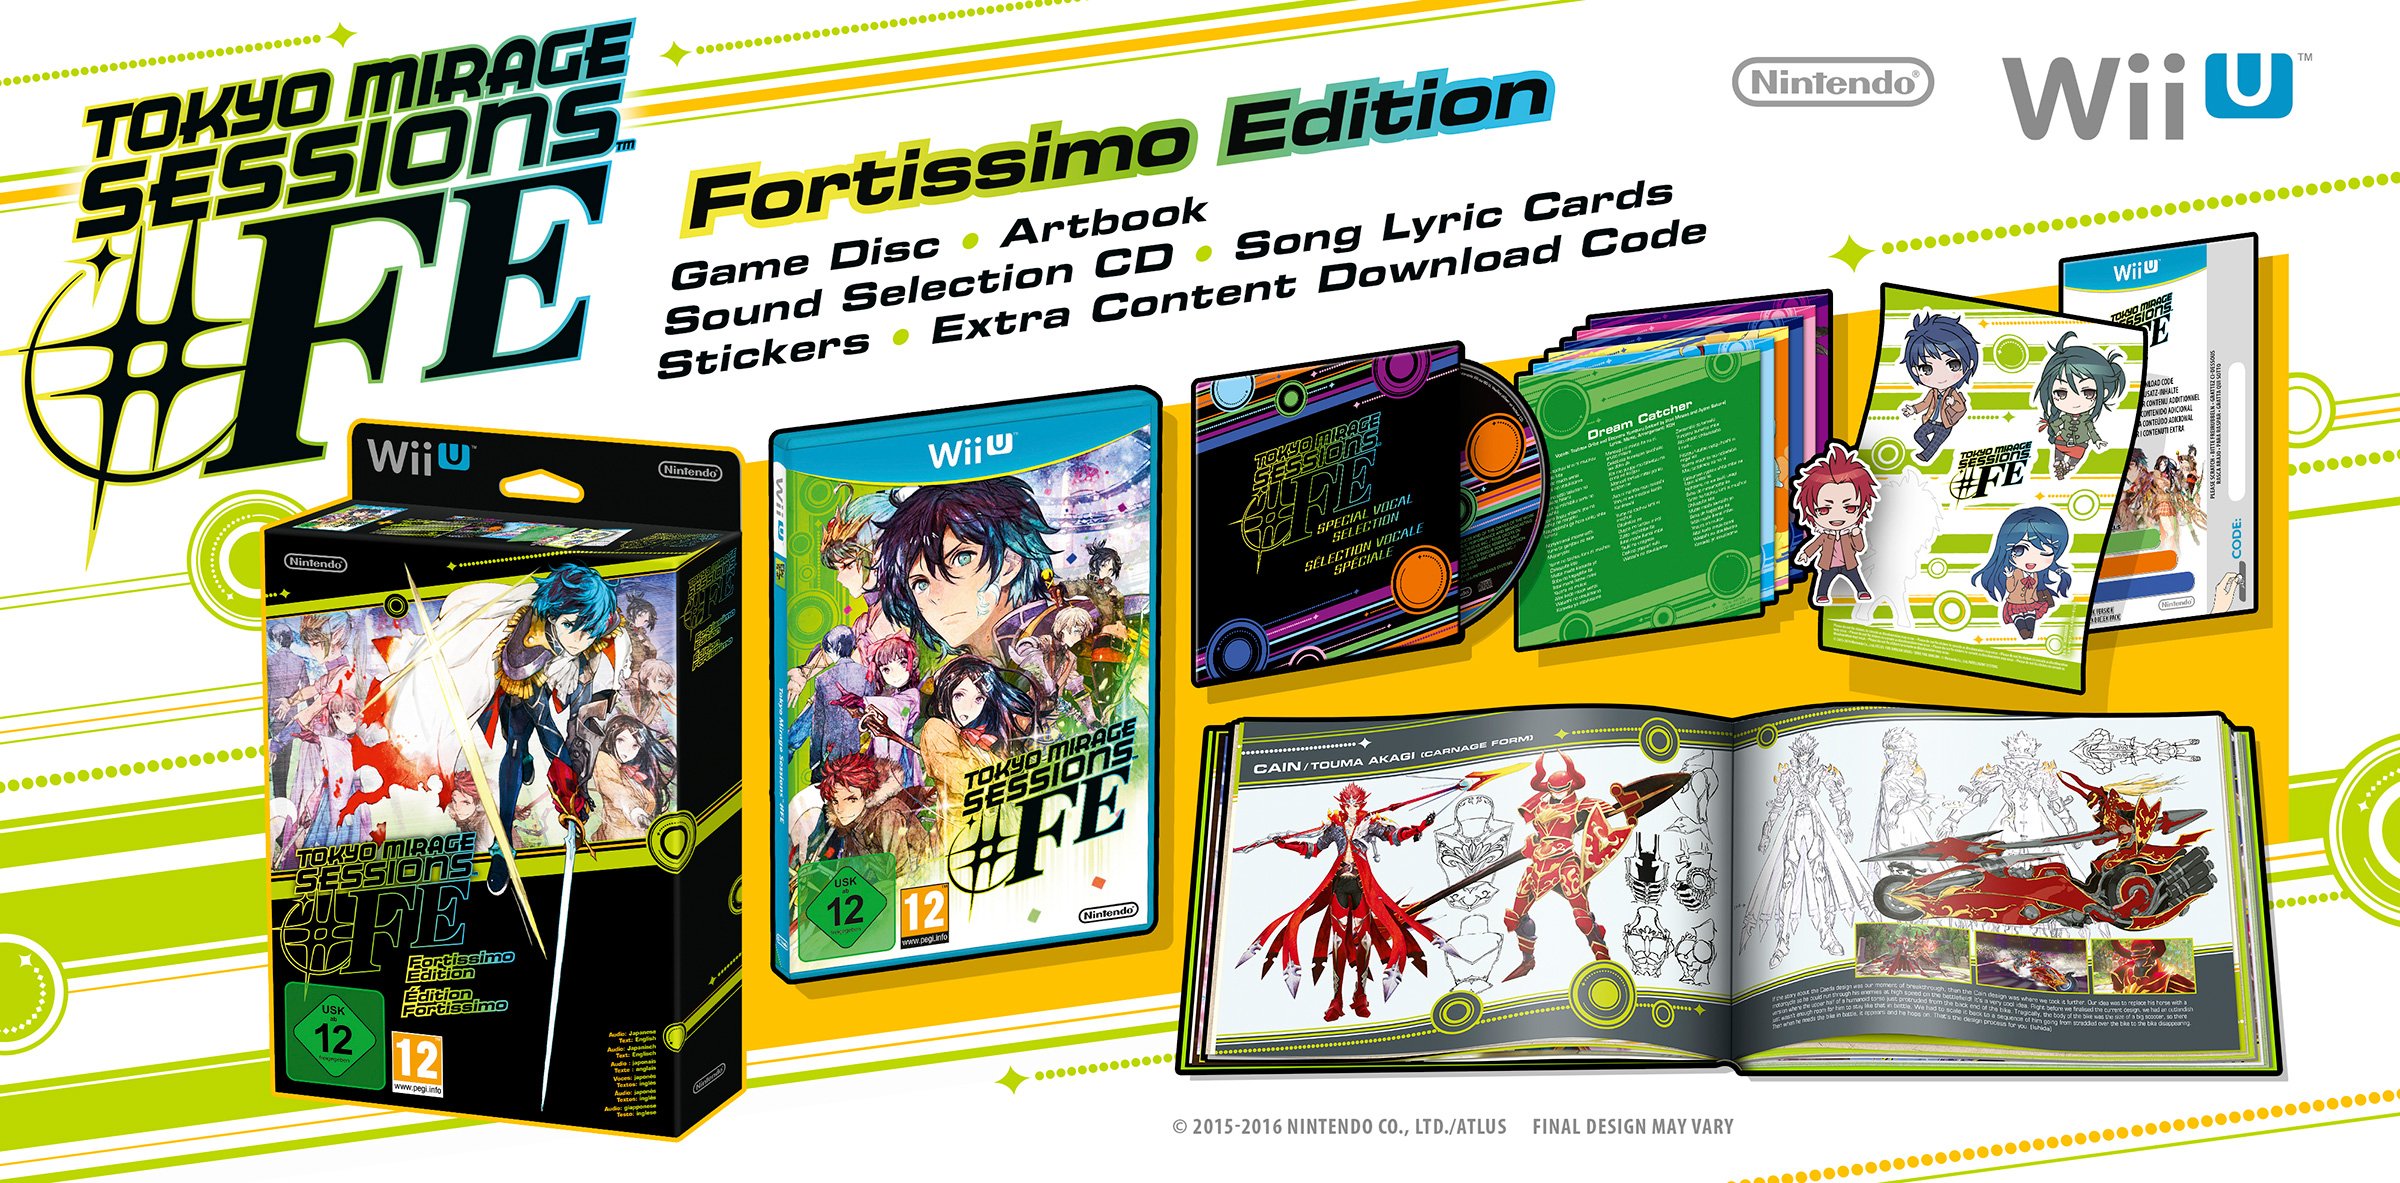 tokyo-mirage-sessions-fe-fortissimo-edition